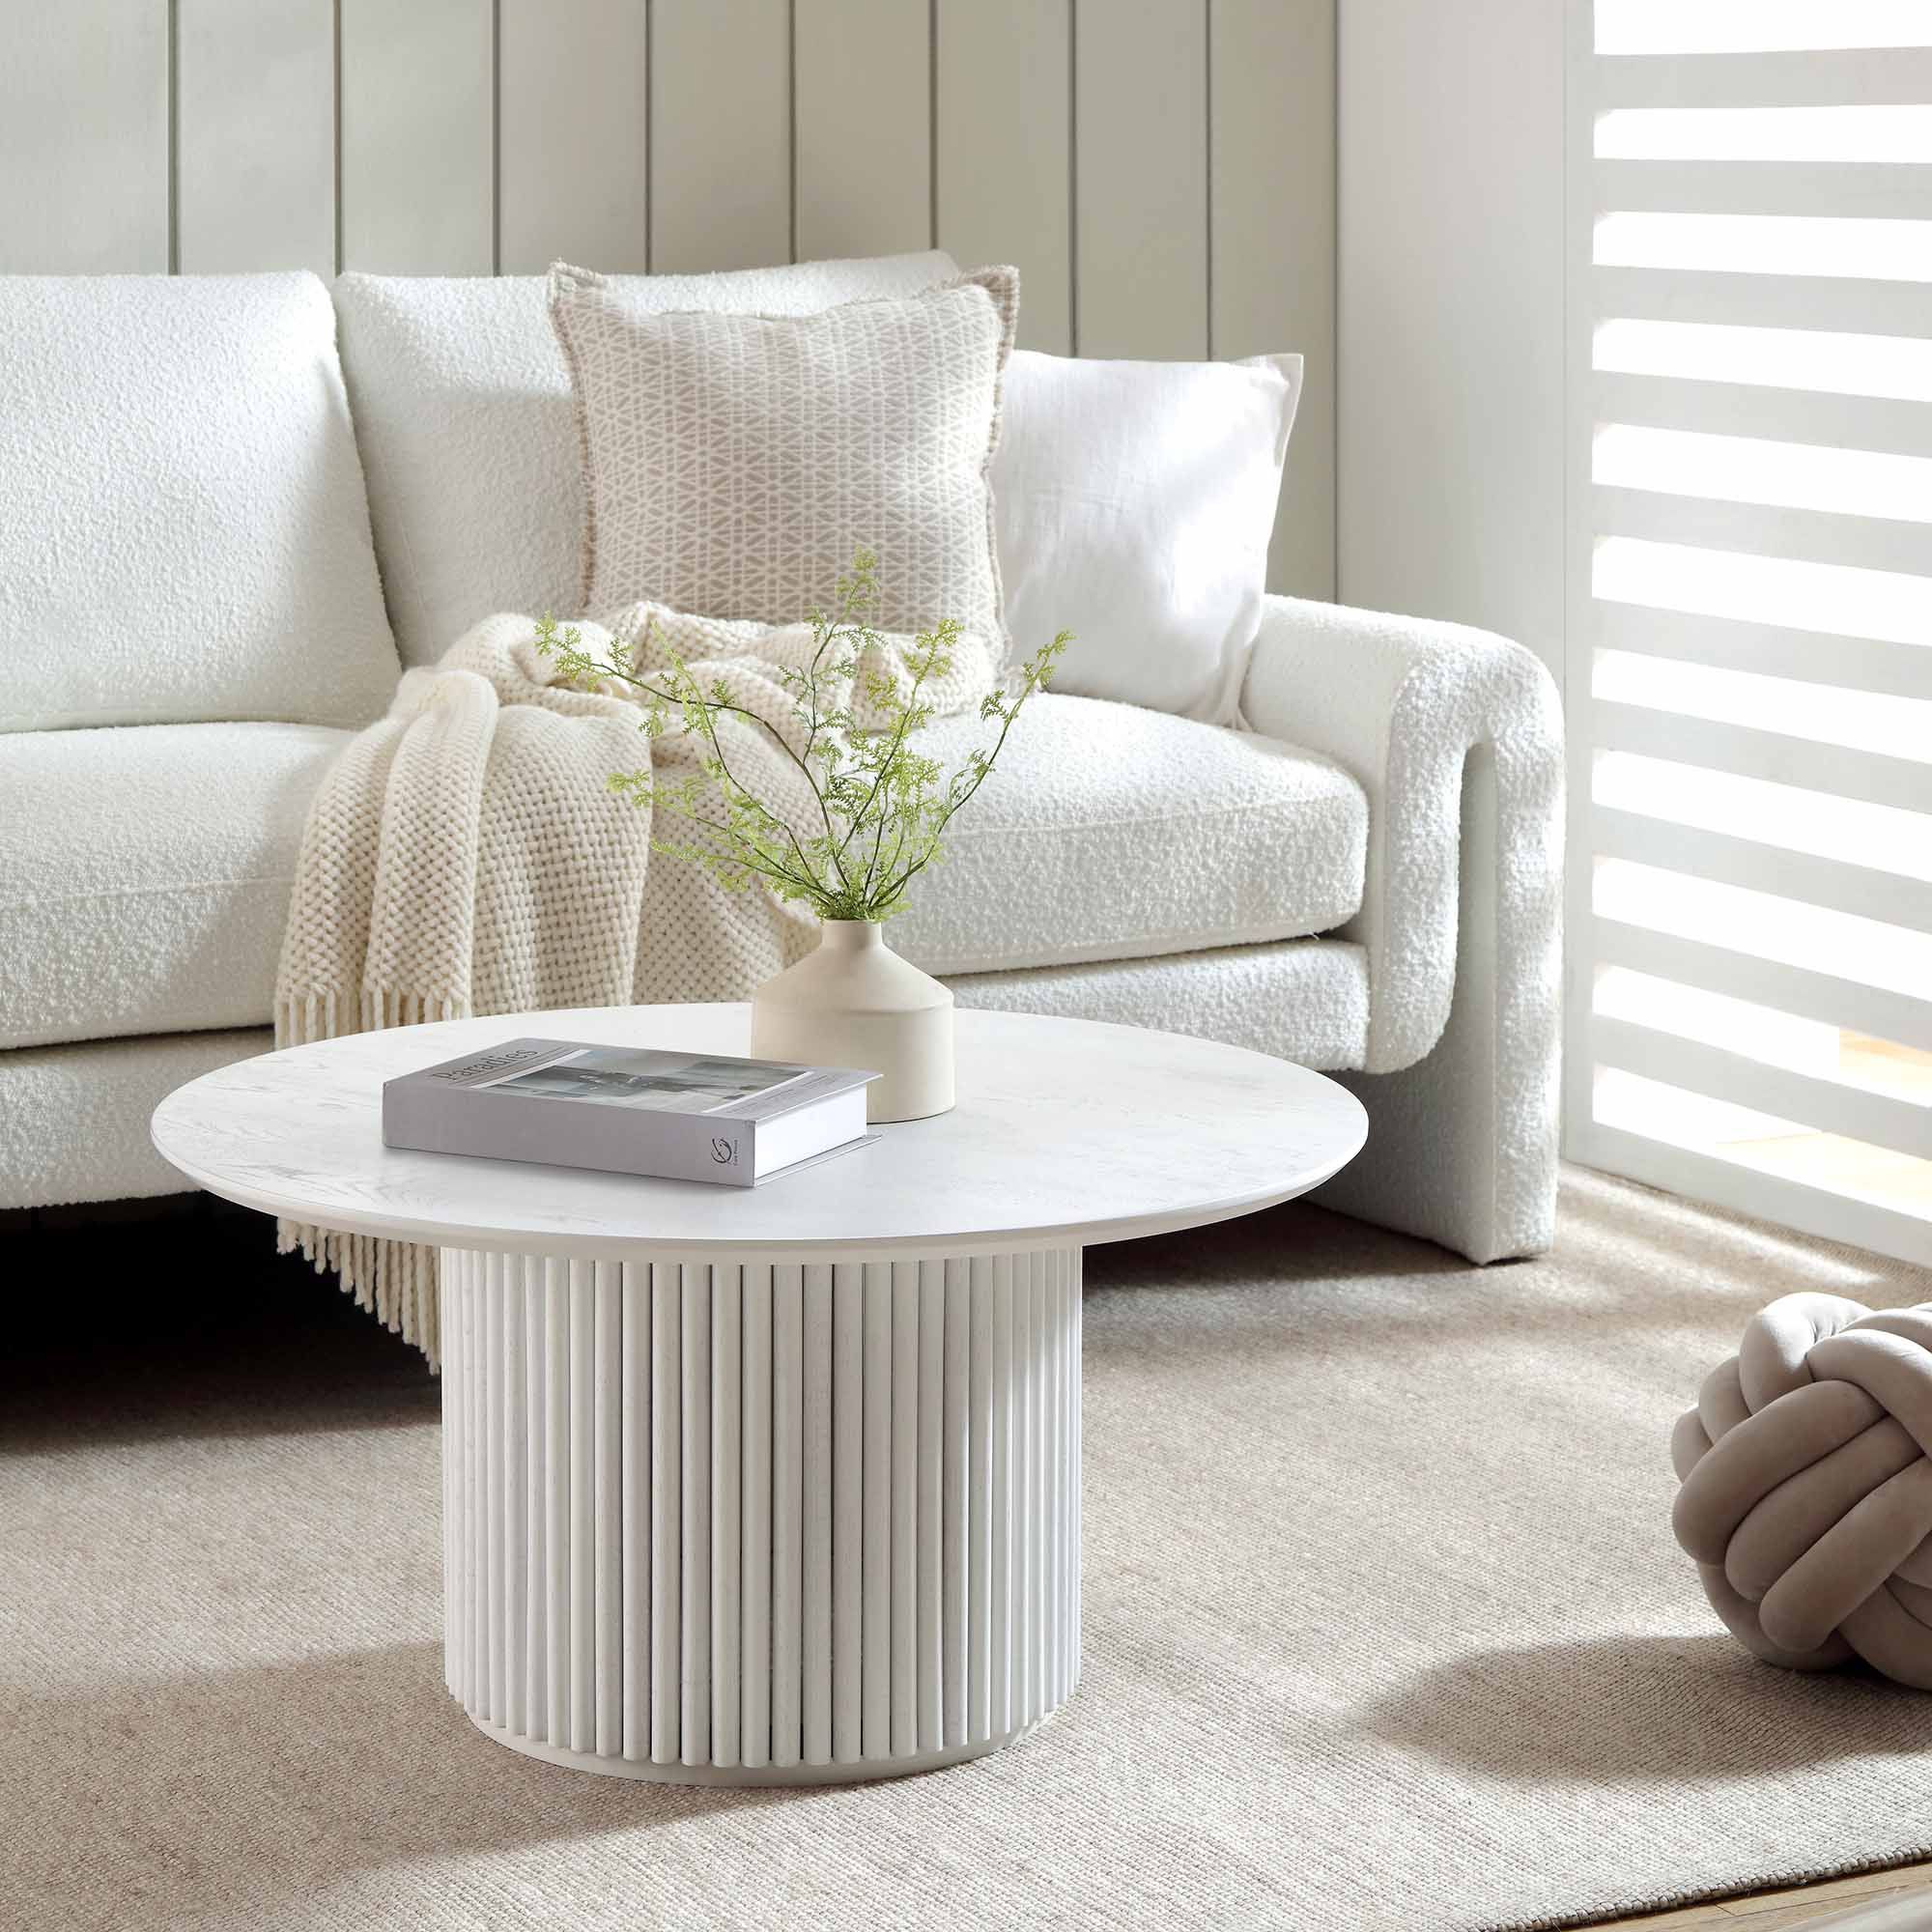 The Beauty of Curves: Choosing the
Perfect Coffee Table for Your Space